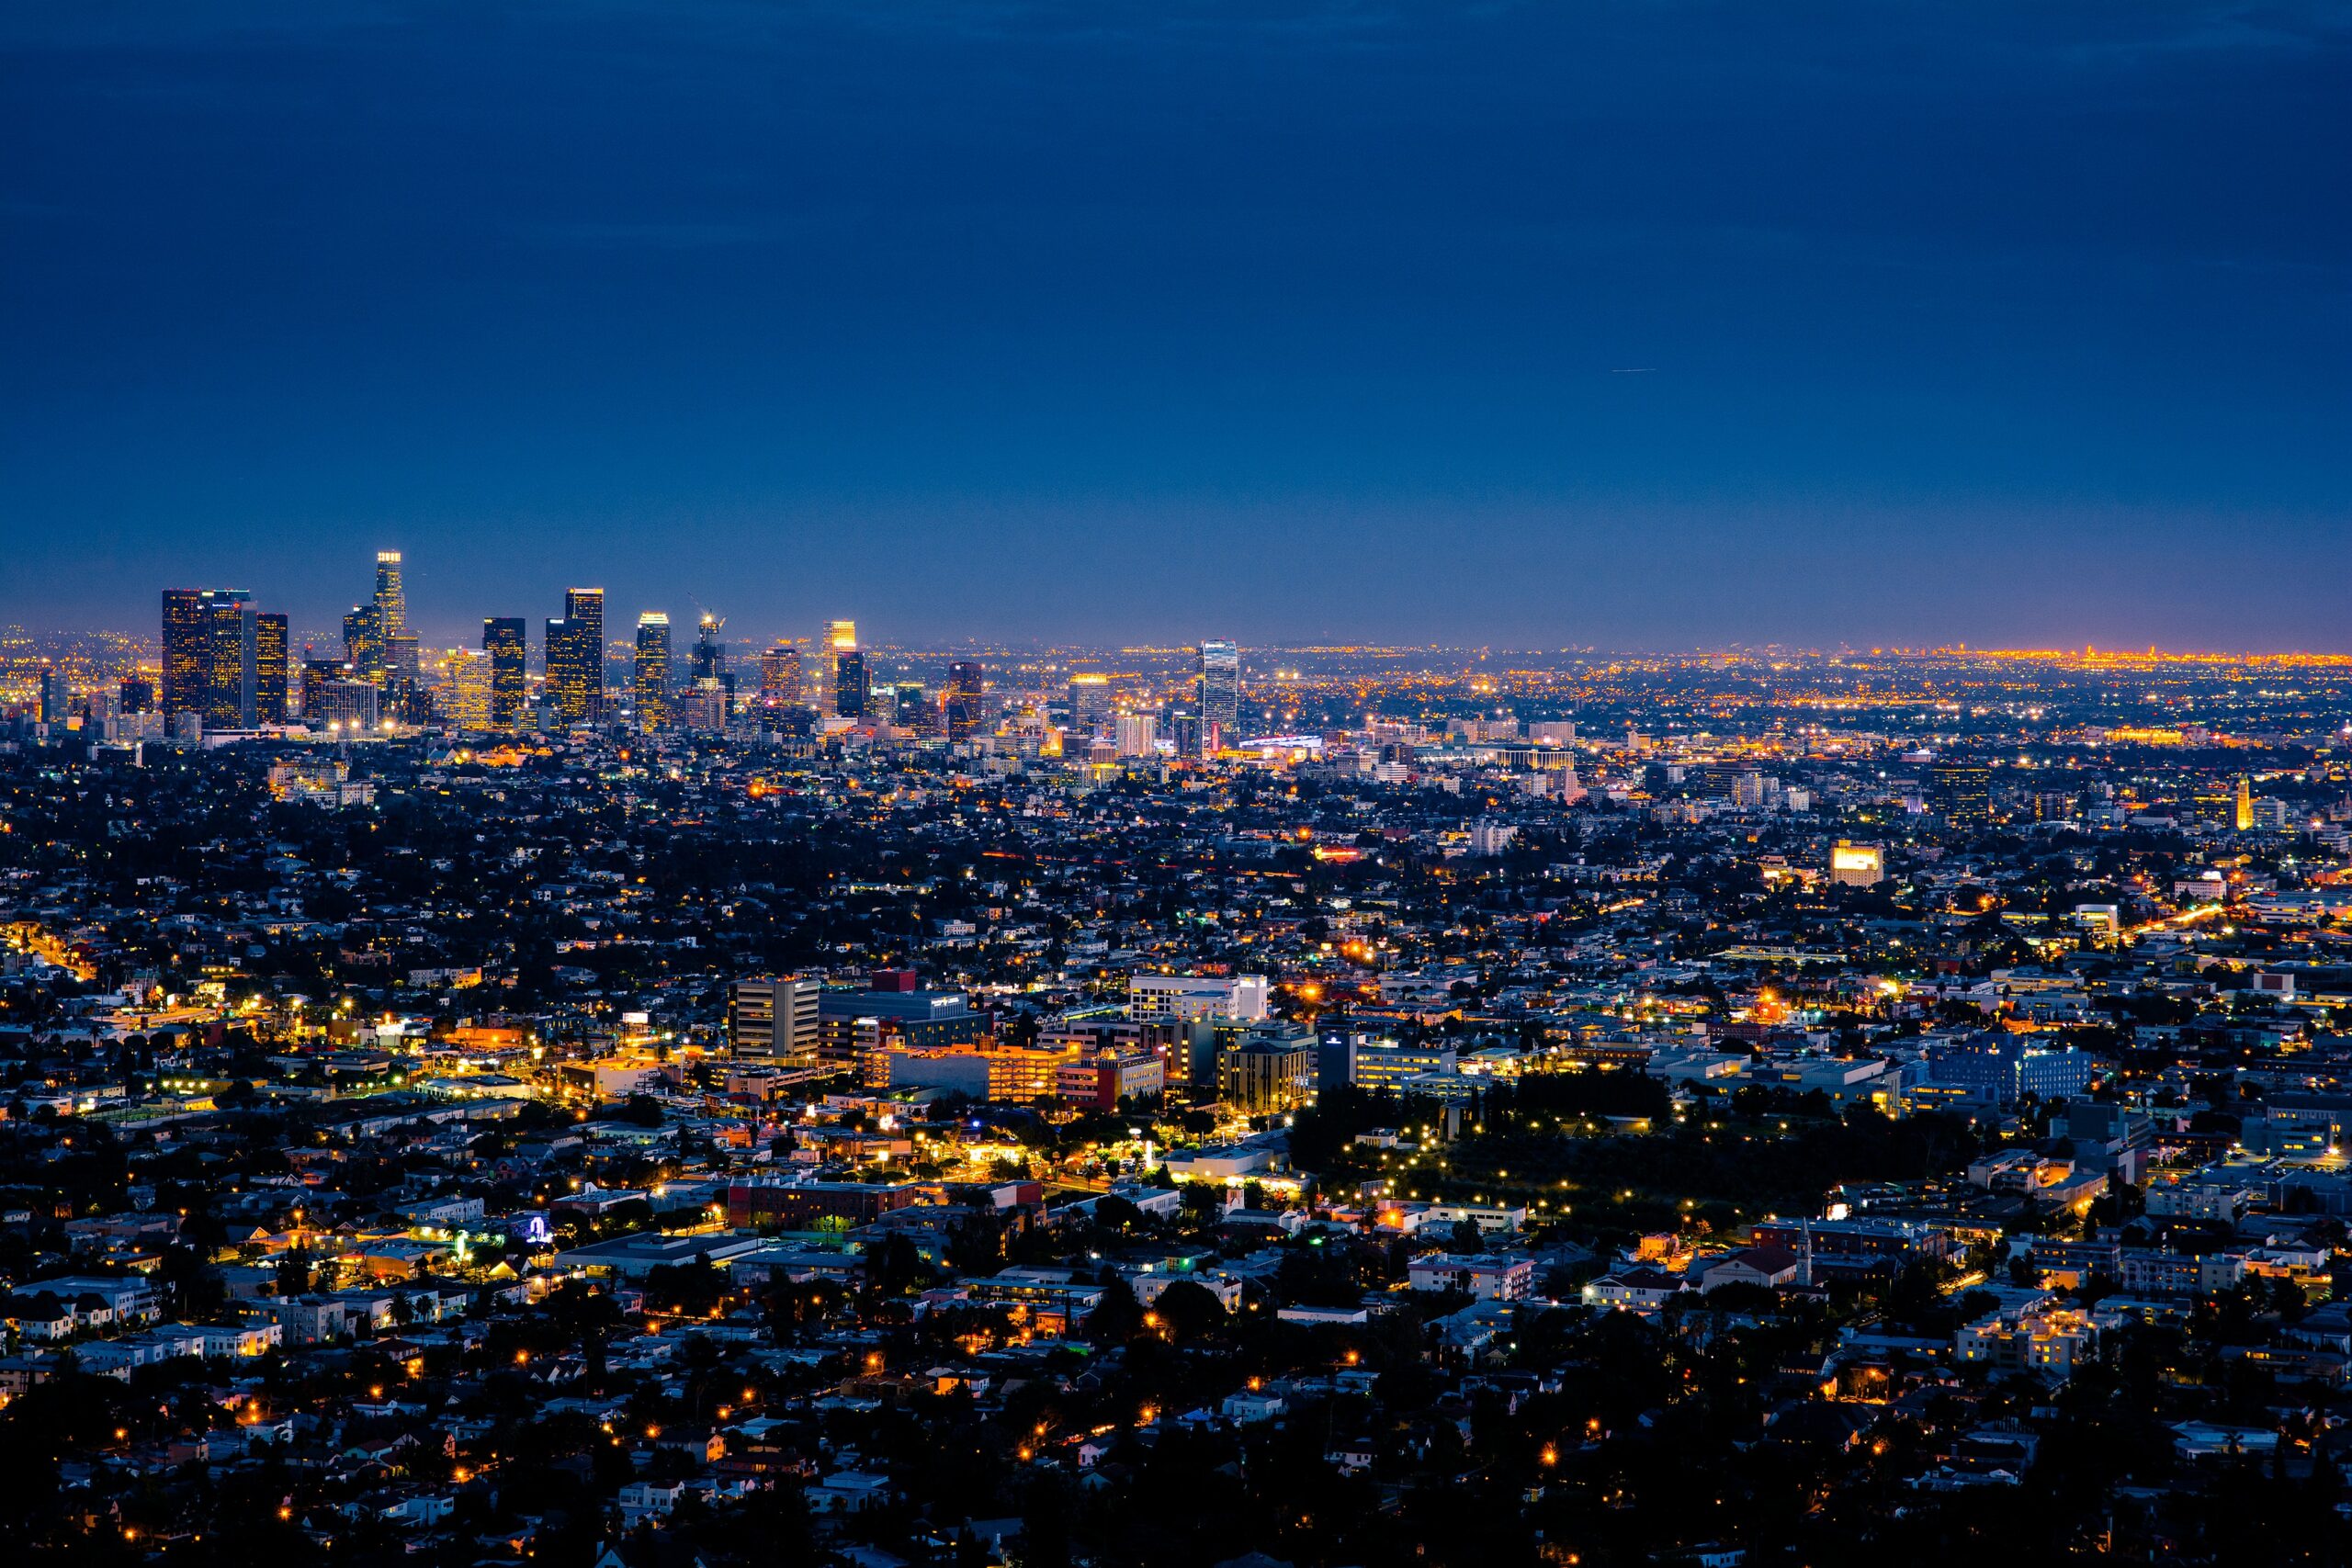 View overlooking Los Angeles city lights at night